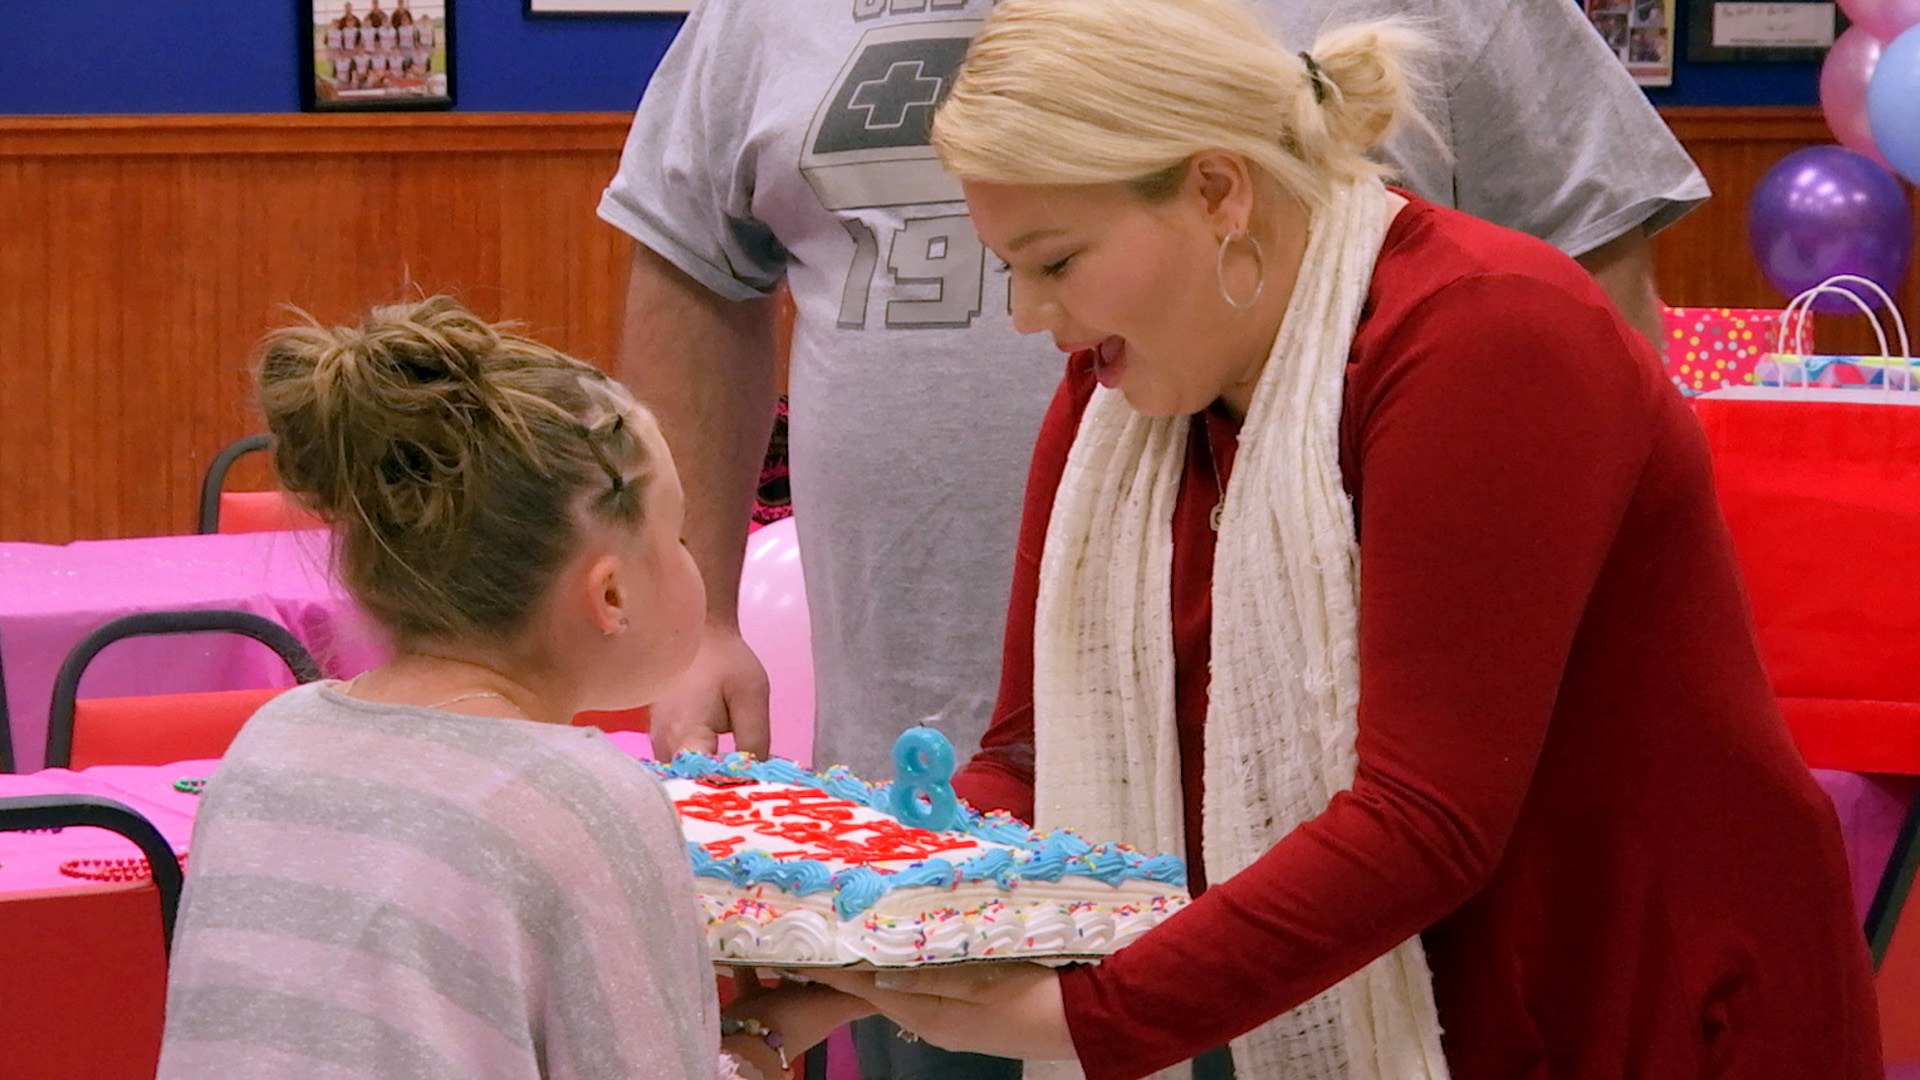 Leah Shirley and  Amber Portwood celebrating a birthday with cake